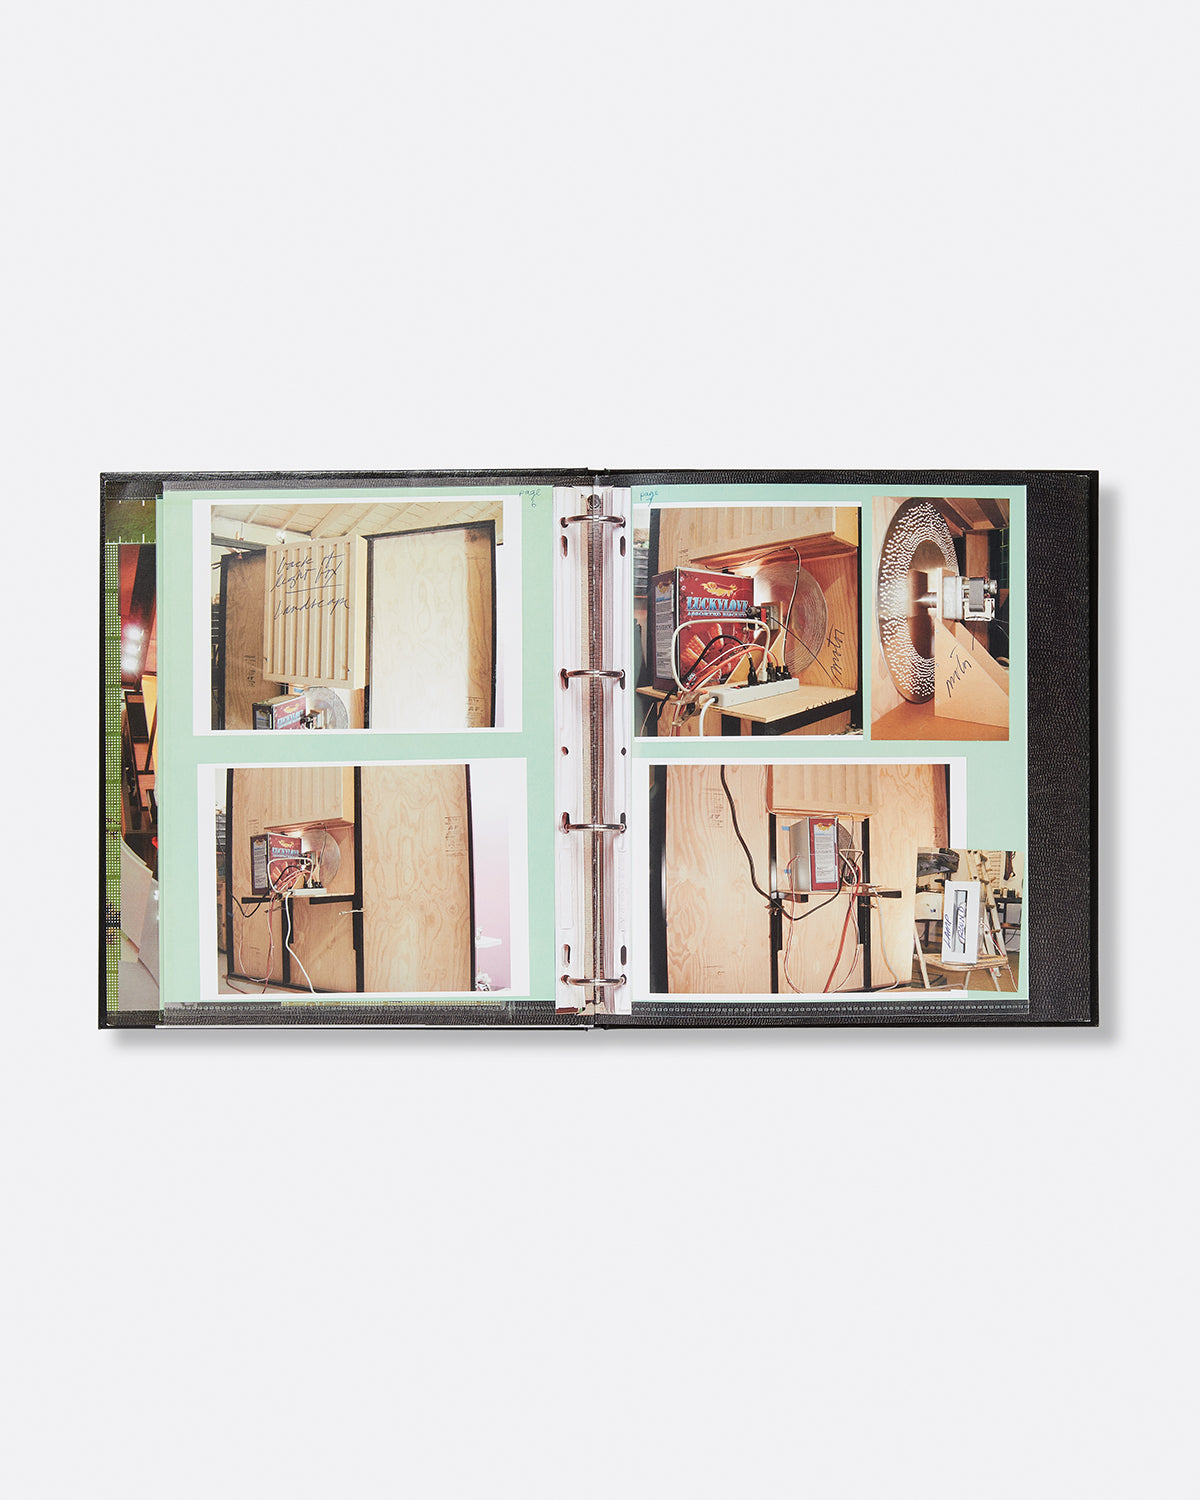 Richard Jackson: Manual for Instructions for "The Maid's Room" Default Title